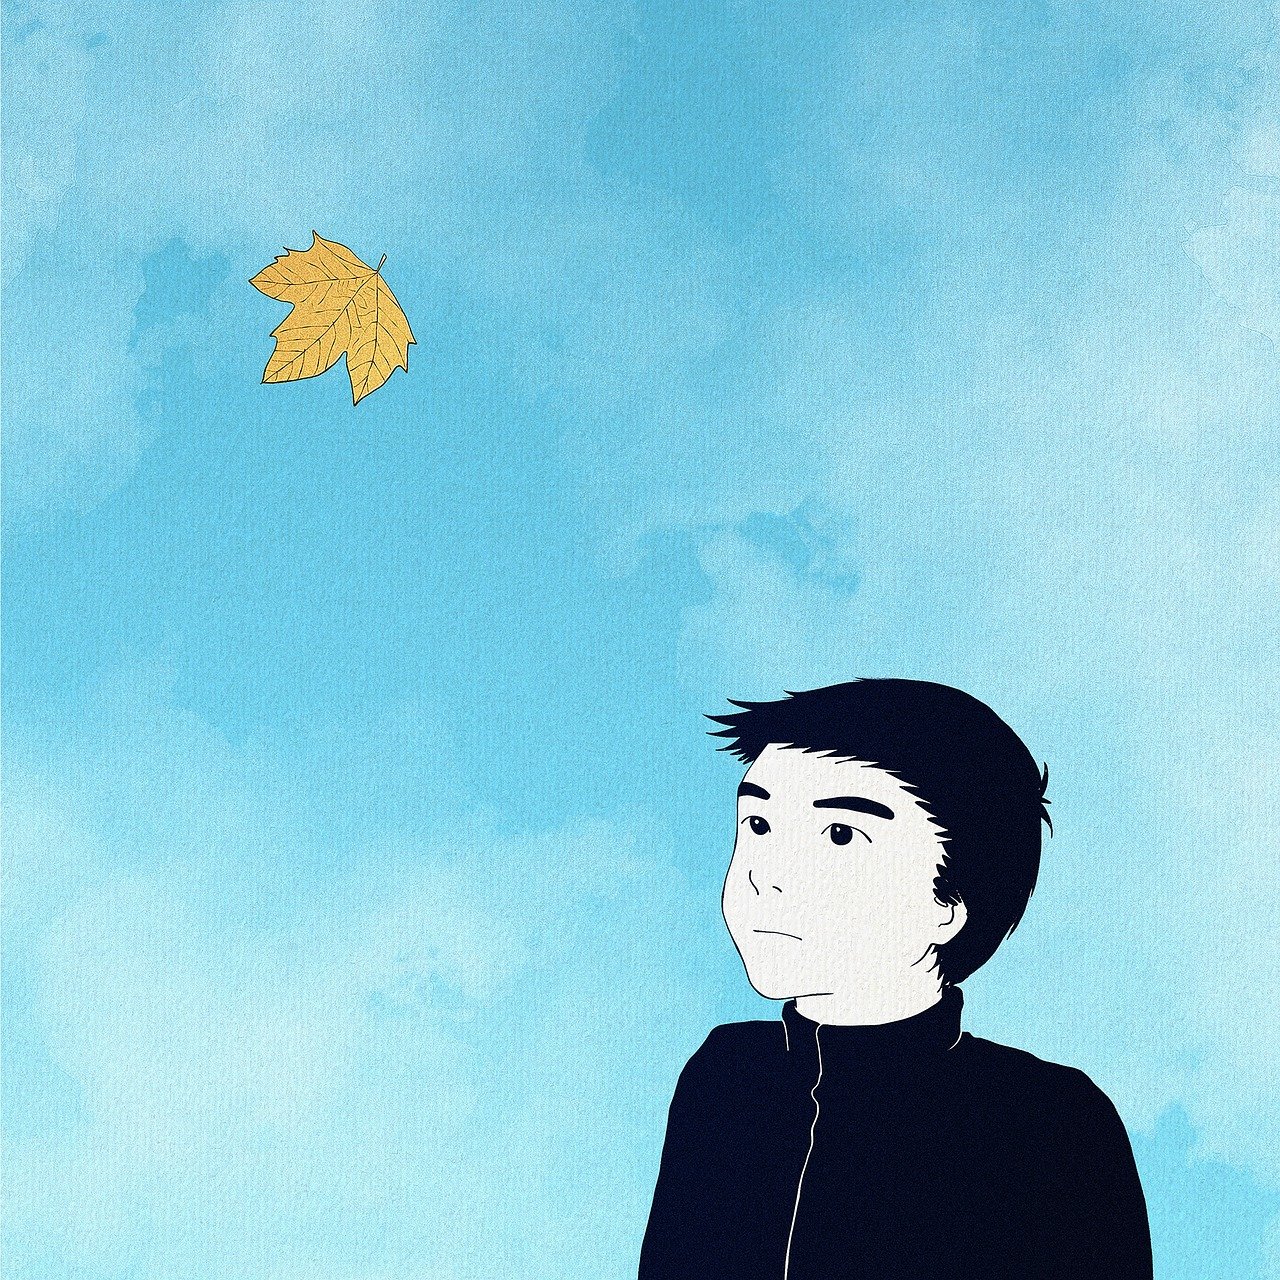 a boy is flying a kite in the sky, inspired by Alex Katz, tumblr, conceptual art, leafs falling, yusuke murata, looking at the sky, drawn with photoshop